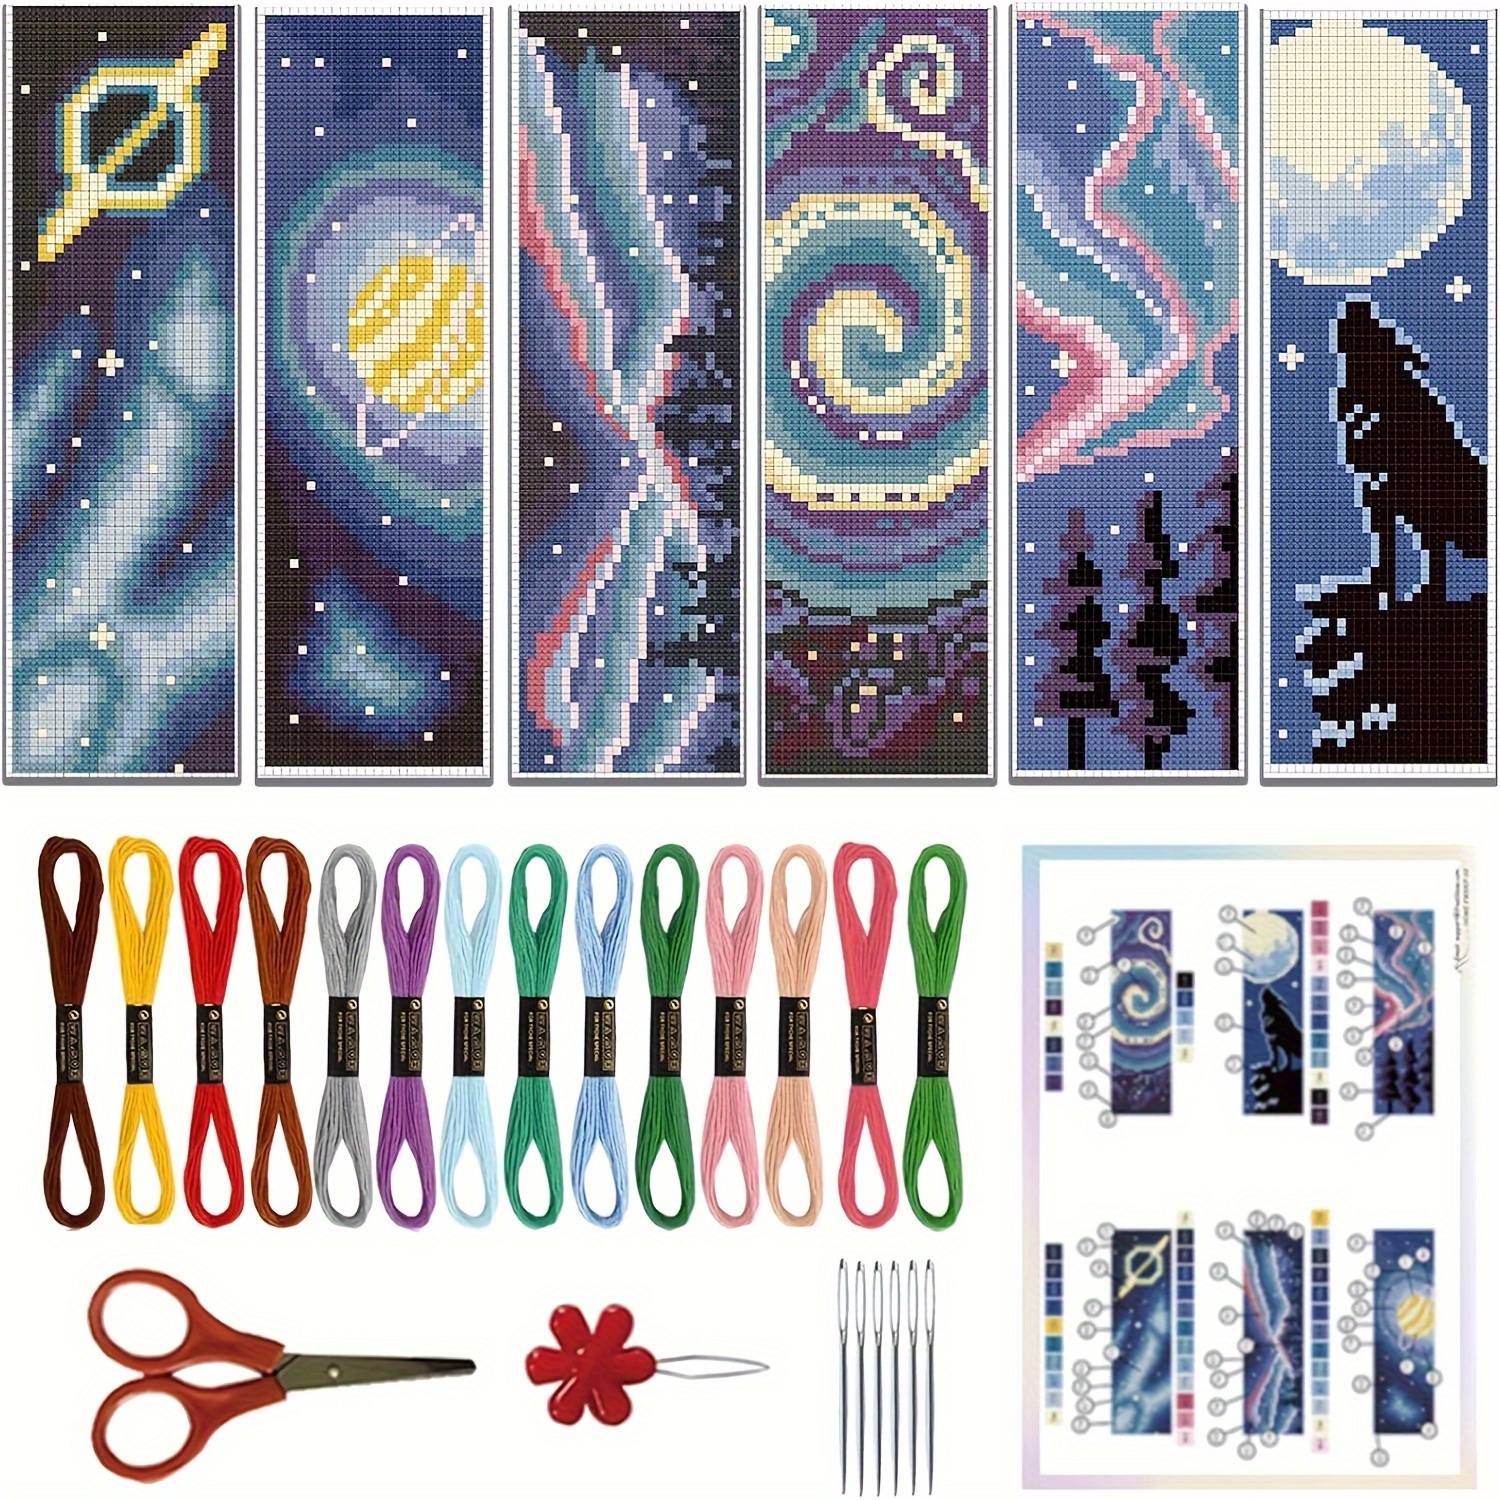 

6 Sets Floral Cross-stitch Bookmarks Kit, Diy Starry Sky And Wolf Pattern Embroidery Material Bag With Instructions, Perfect Gift For Friends & Family